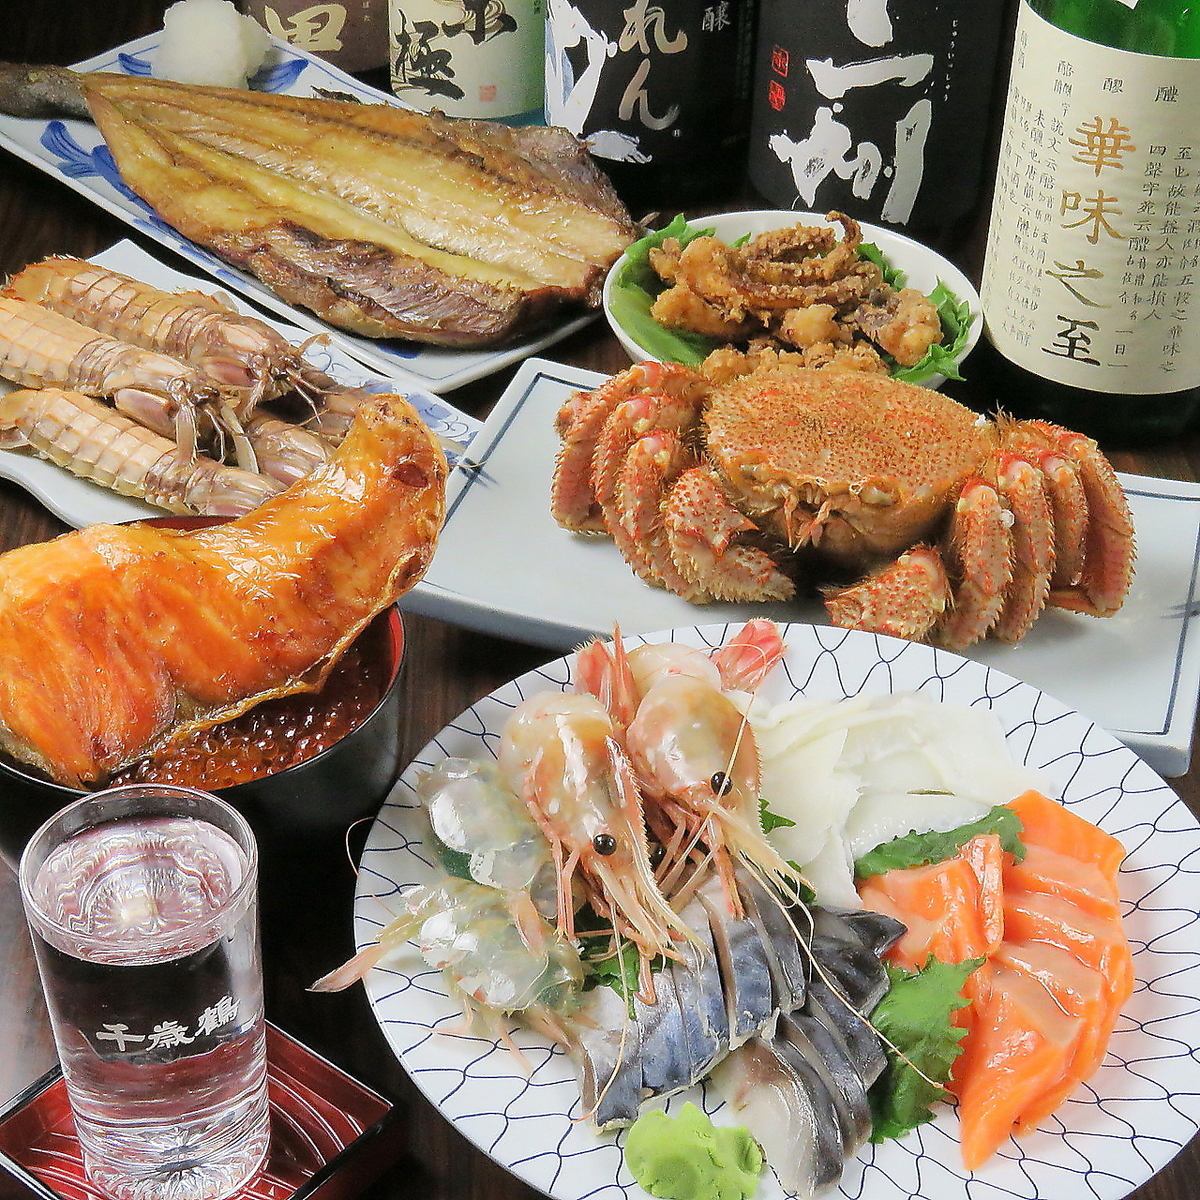 When it comes to seafood in Sapporo, it's home! Taste seasonal fish in various cooking methods